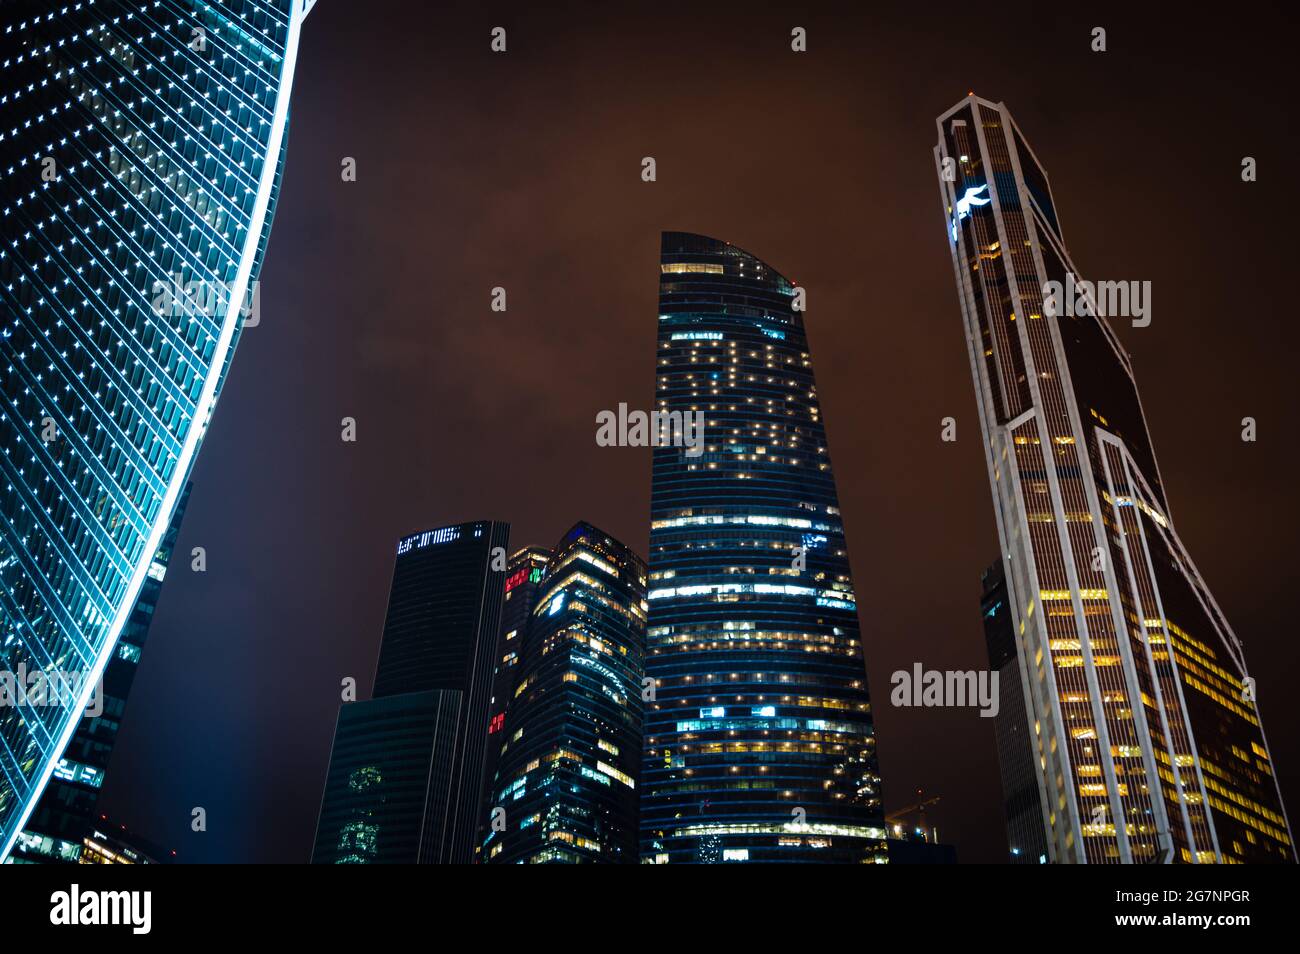 Moscow International Business Center in the city of Moscow, Russia. Stock Photo